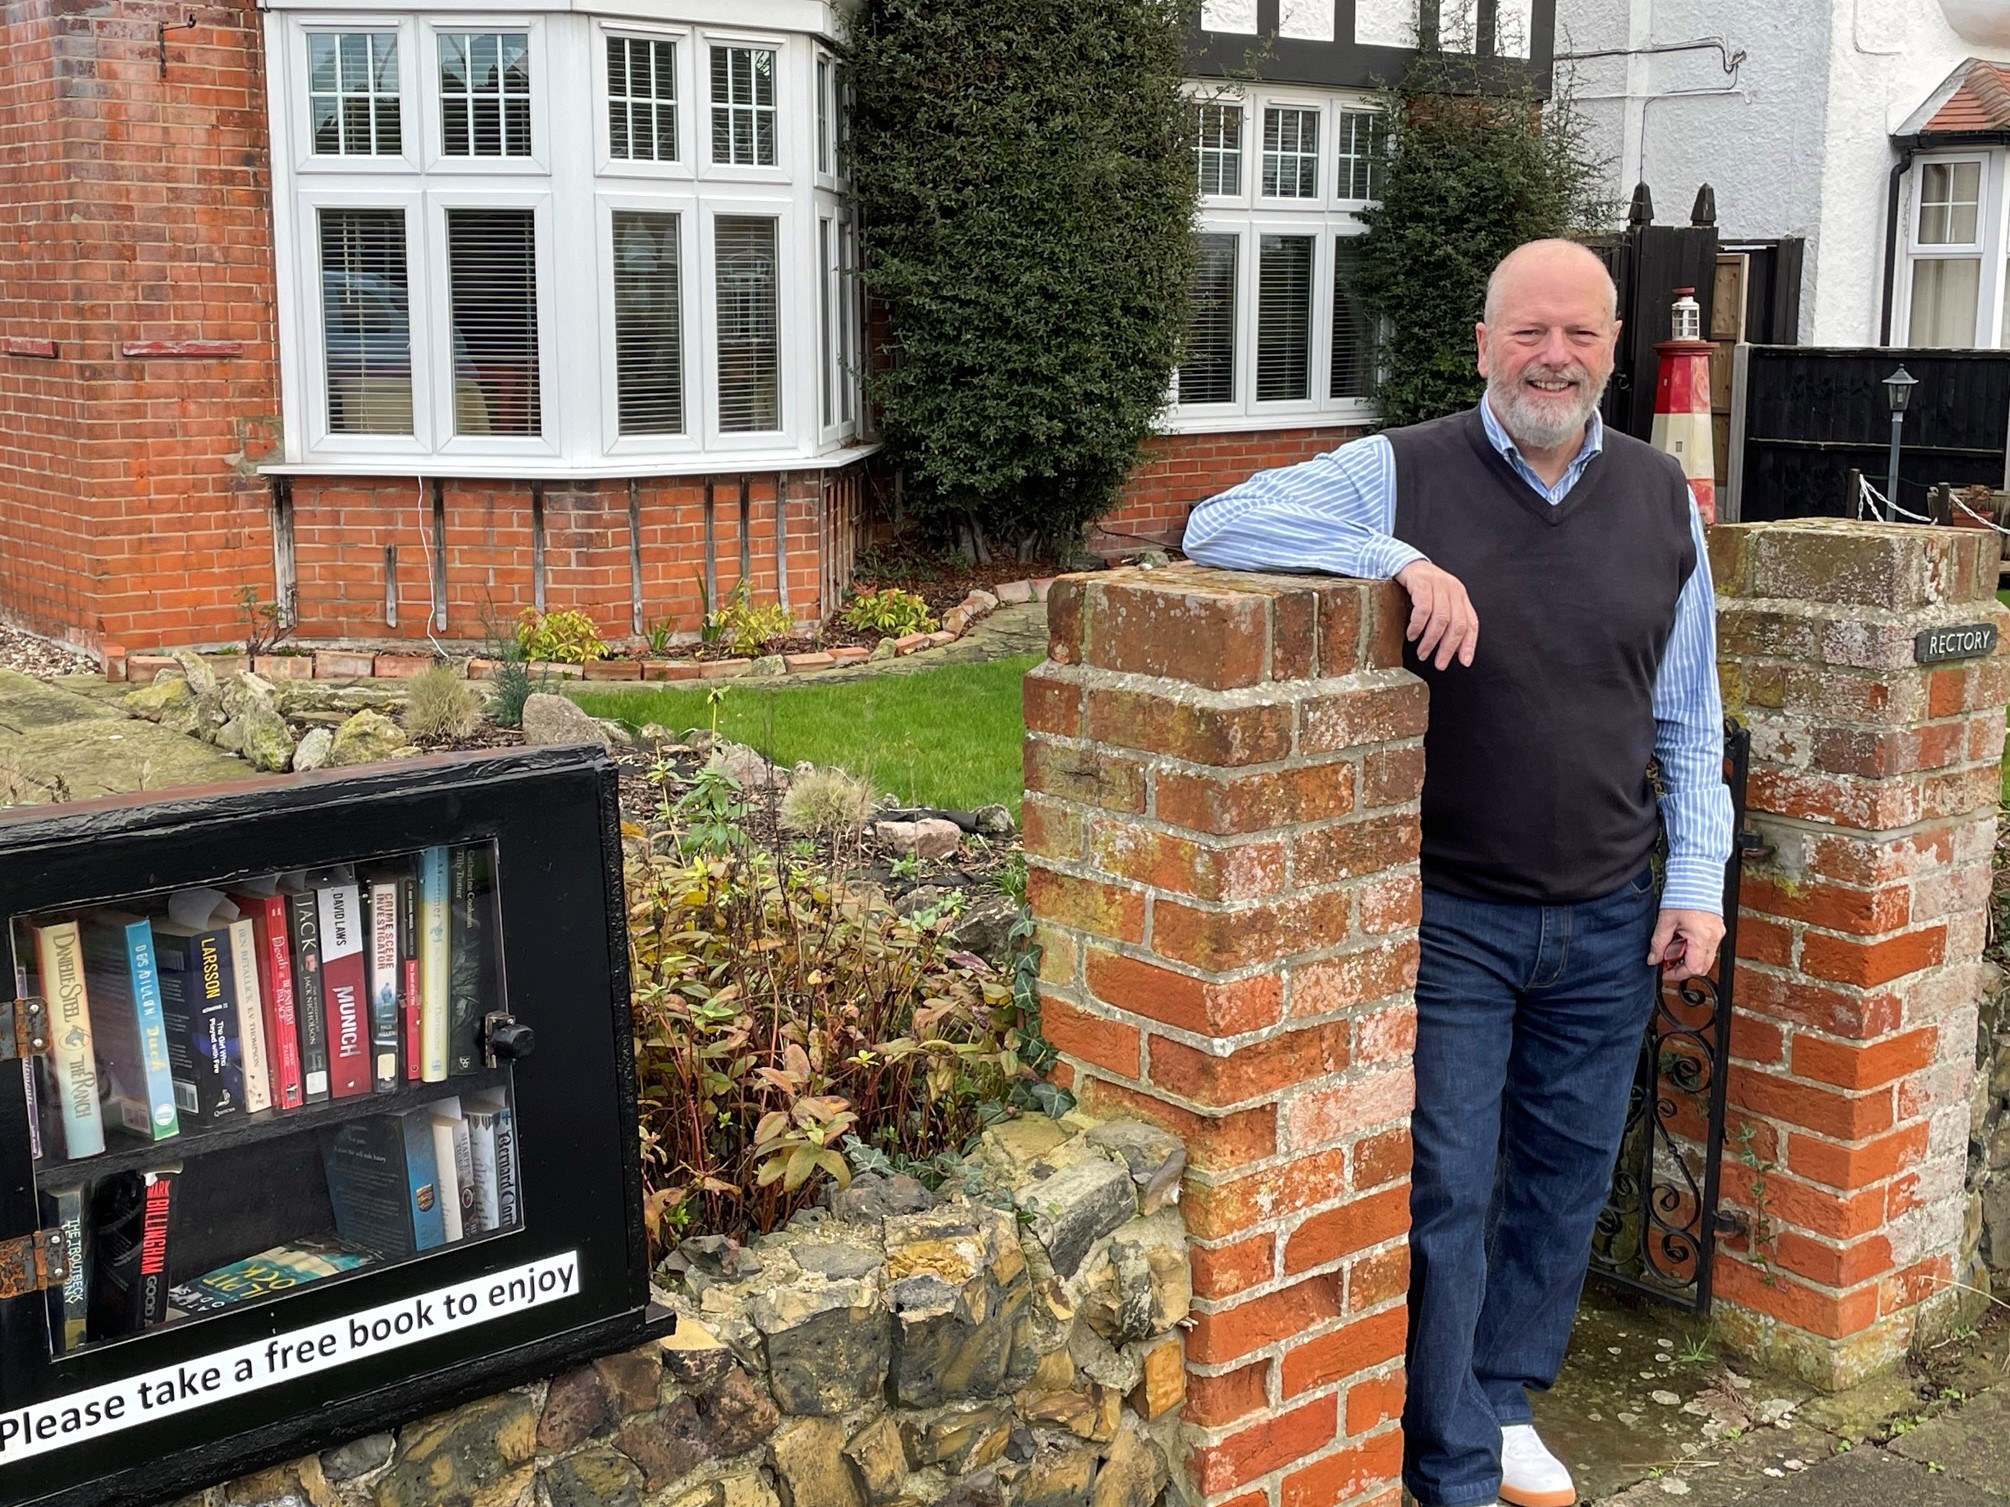 Good deed - Don Smith, 65, of Frinton, launched a book box project providing free books for residents to enjoy